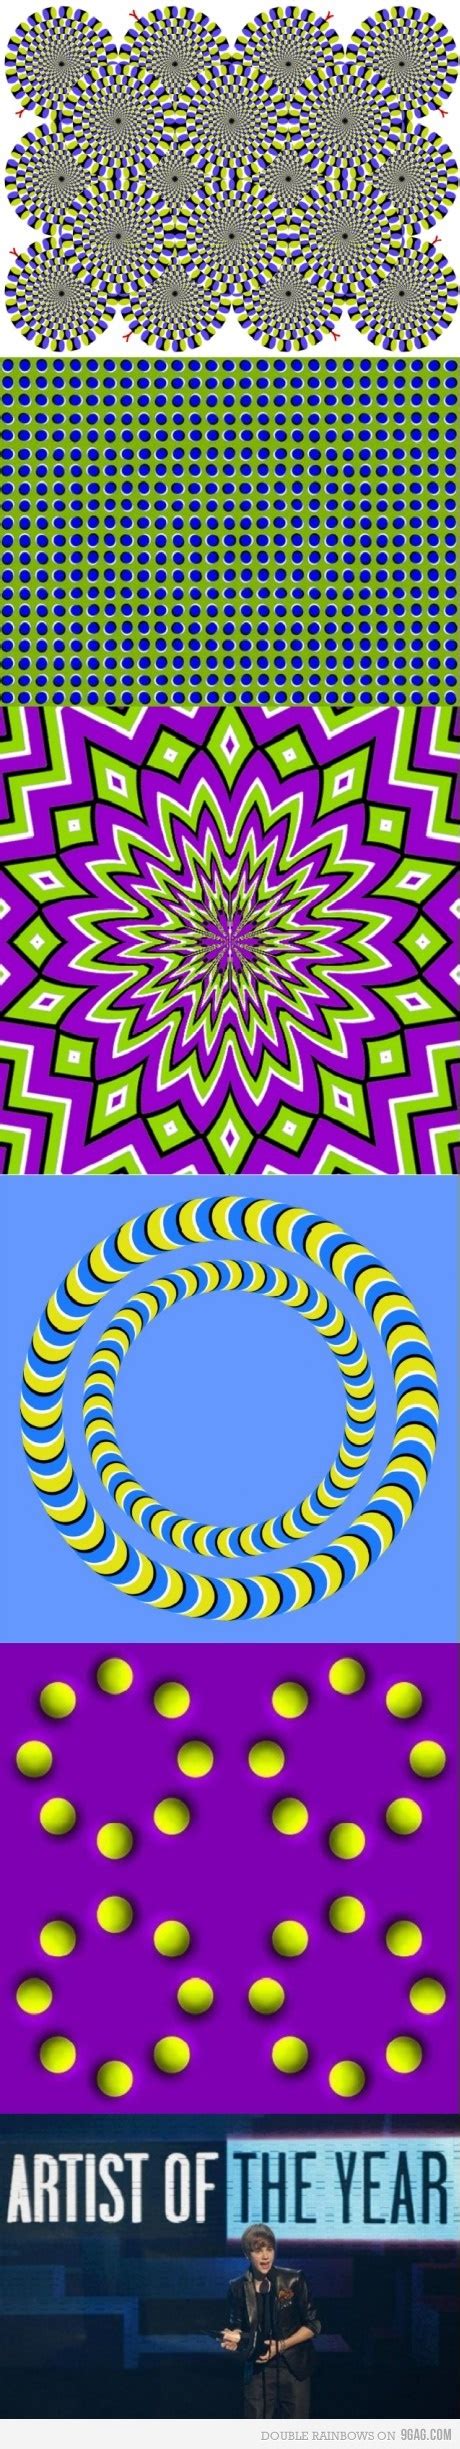 Just Some Optical Illusions Cool Optical Illusions Optical Illusions